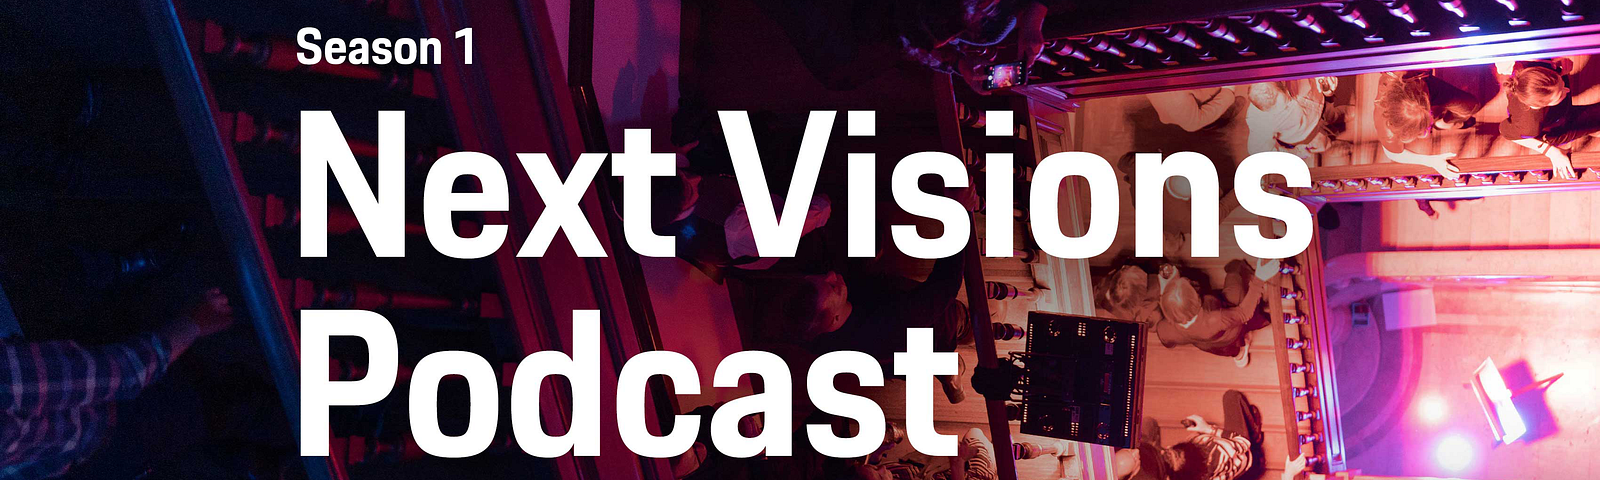 In the Next Visions Podcast thought leaders of today discuss visions of tomorrow